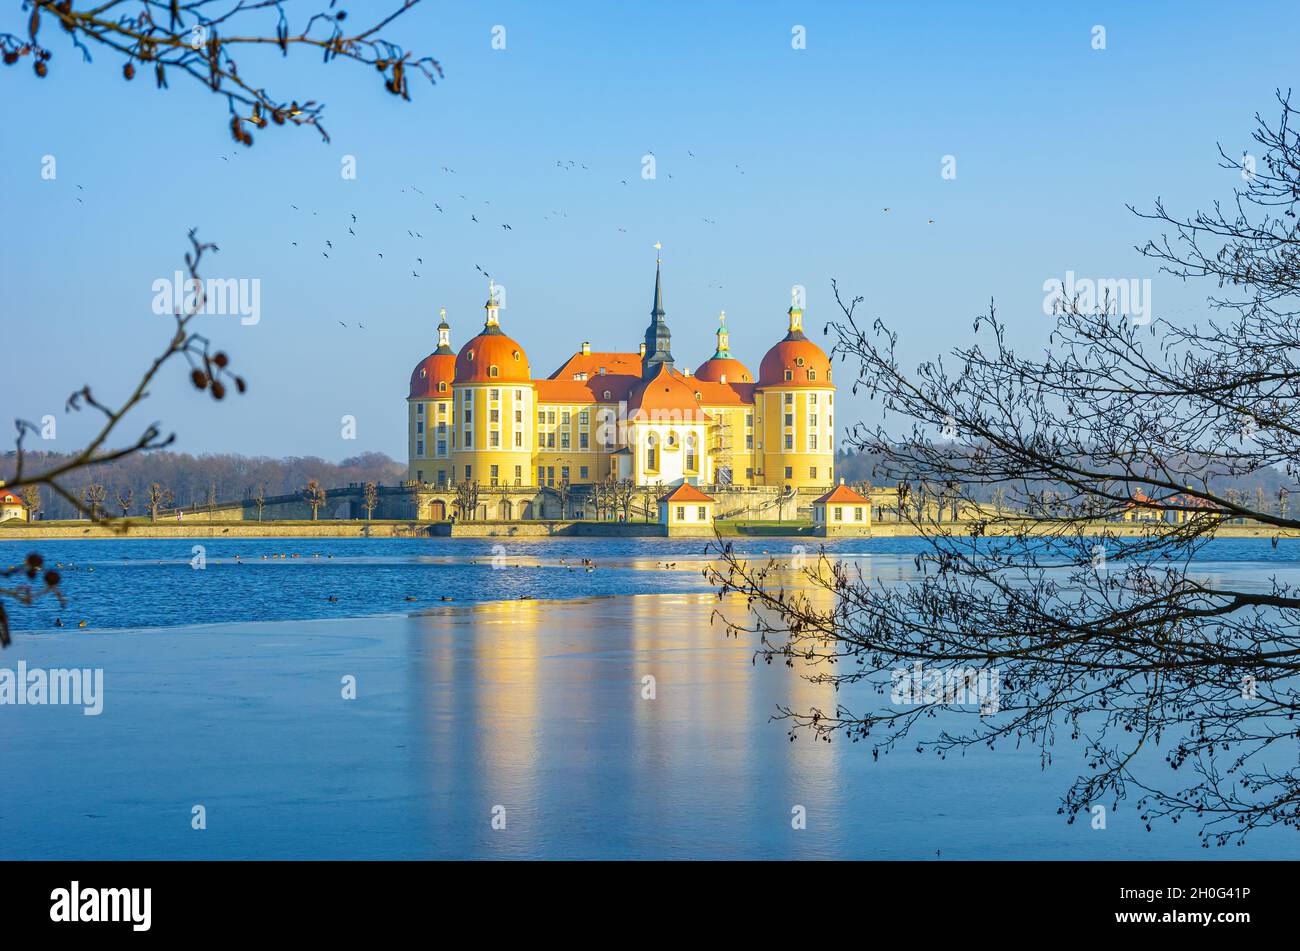 Moritzburg near Dresden, Saxony, Germany: Wintry Moritzburg Palace from the Northwest, surrounded by the partially frozen palace pond. Stock Photo